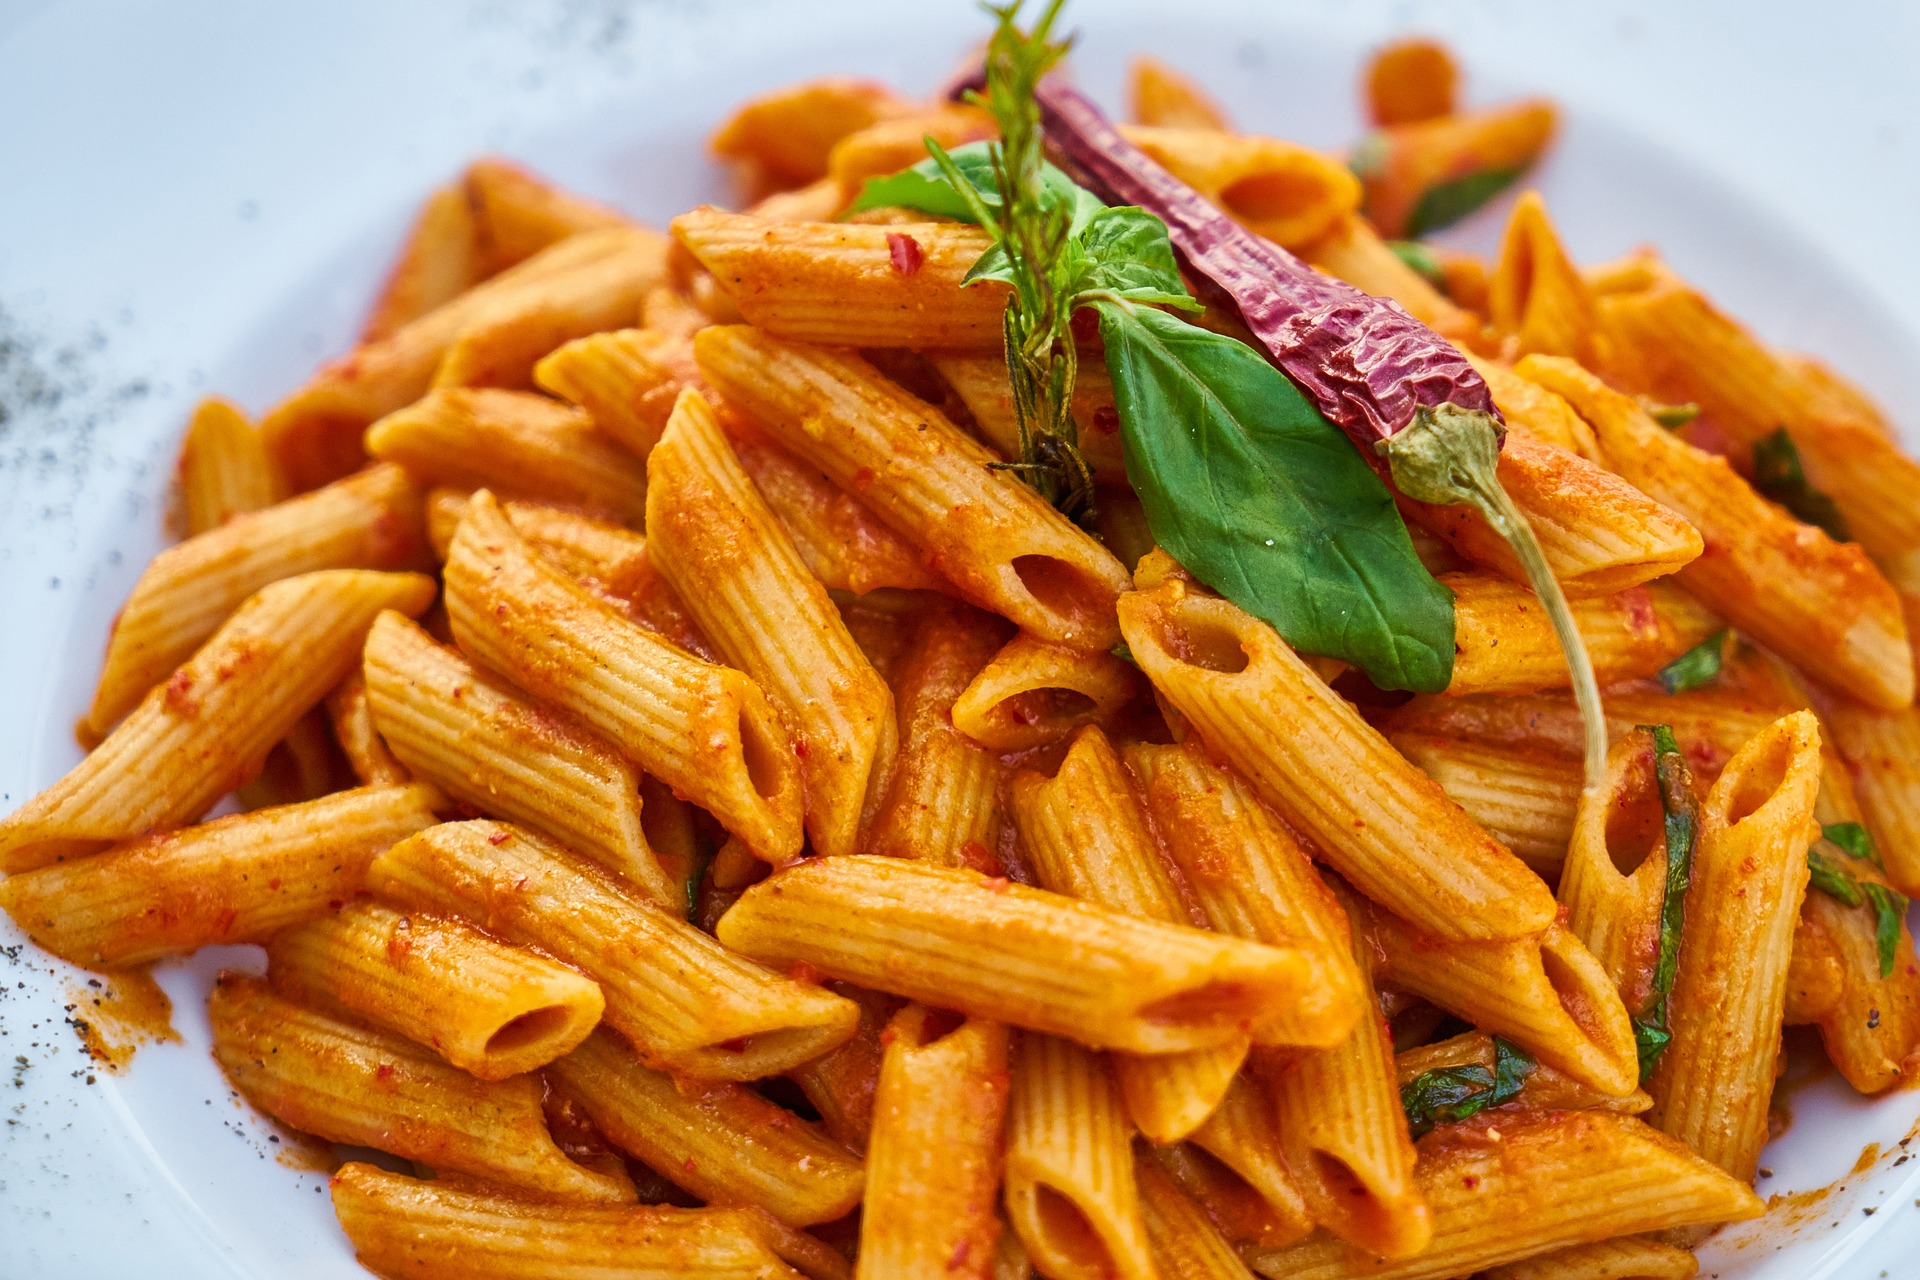 A bowl of penne pasta with red sauce.